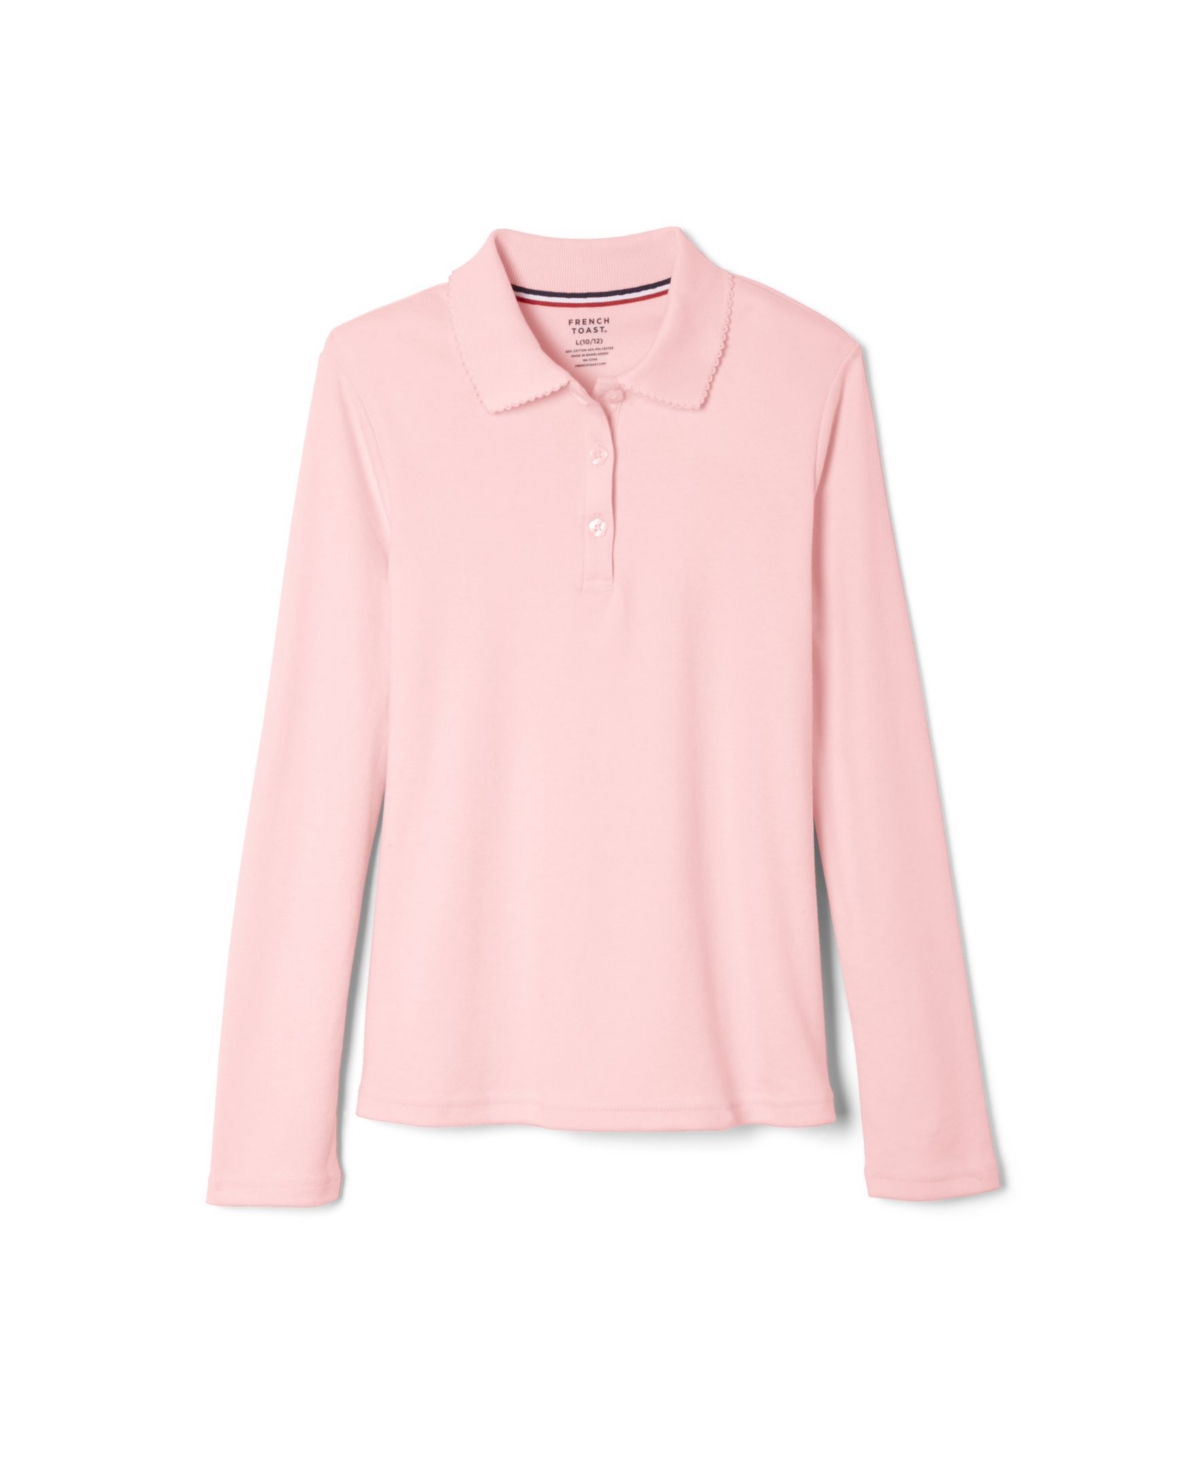 FRENCH TOAST LITTLE GIRLS LONG SLEEVE INTERLOCK KNIT POLO WITH PICOT COLLAR